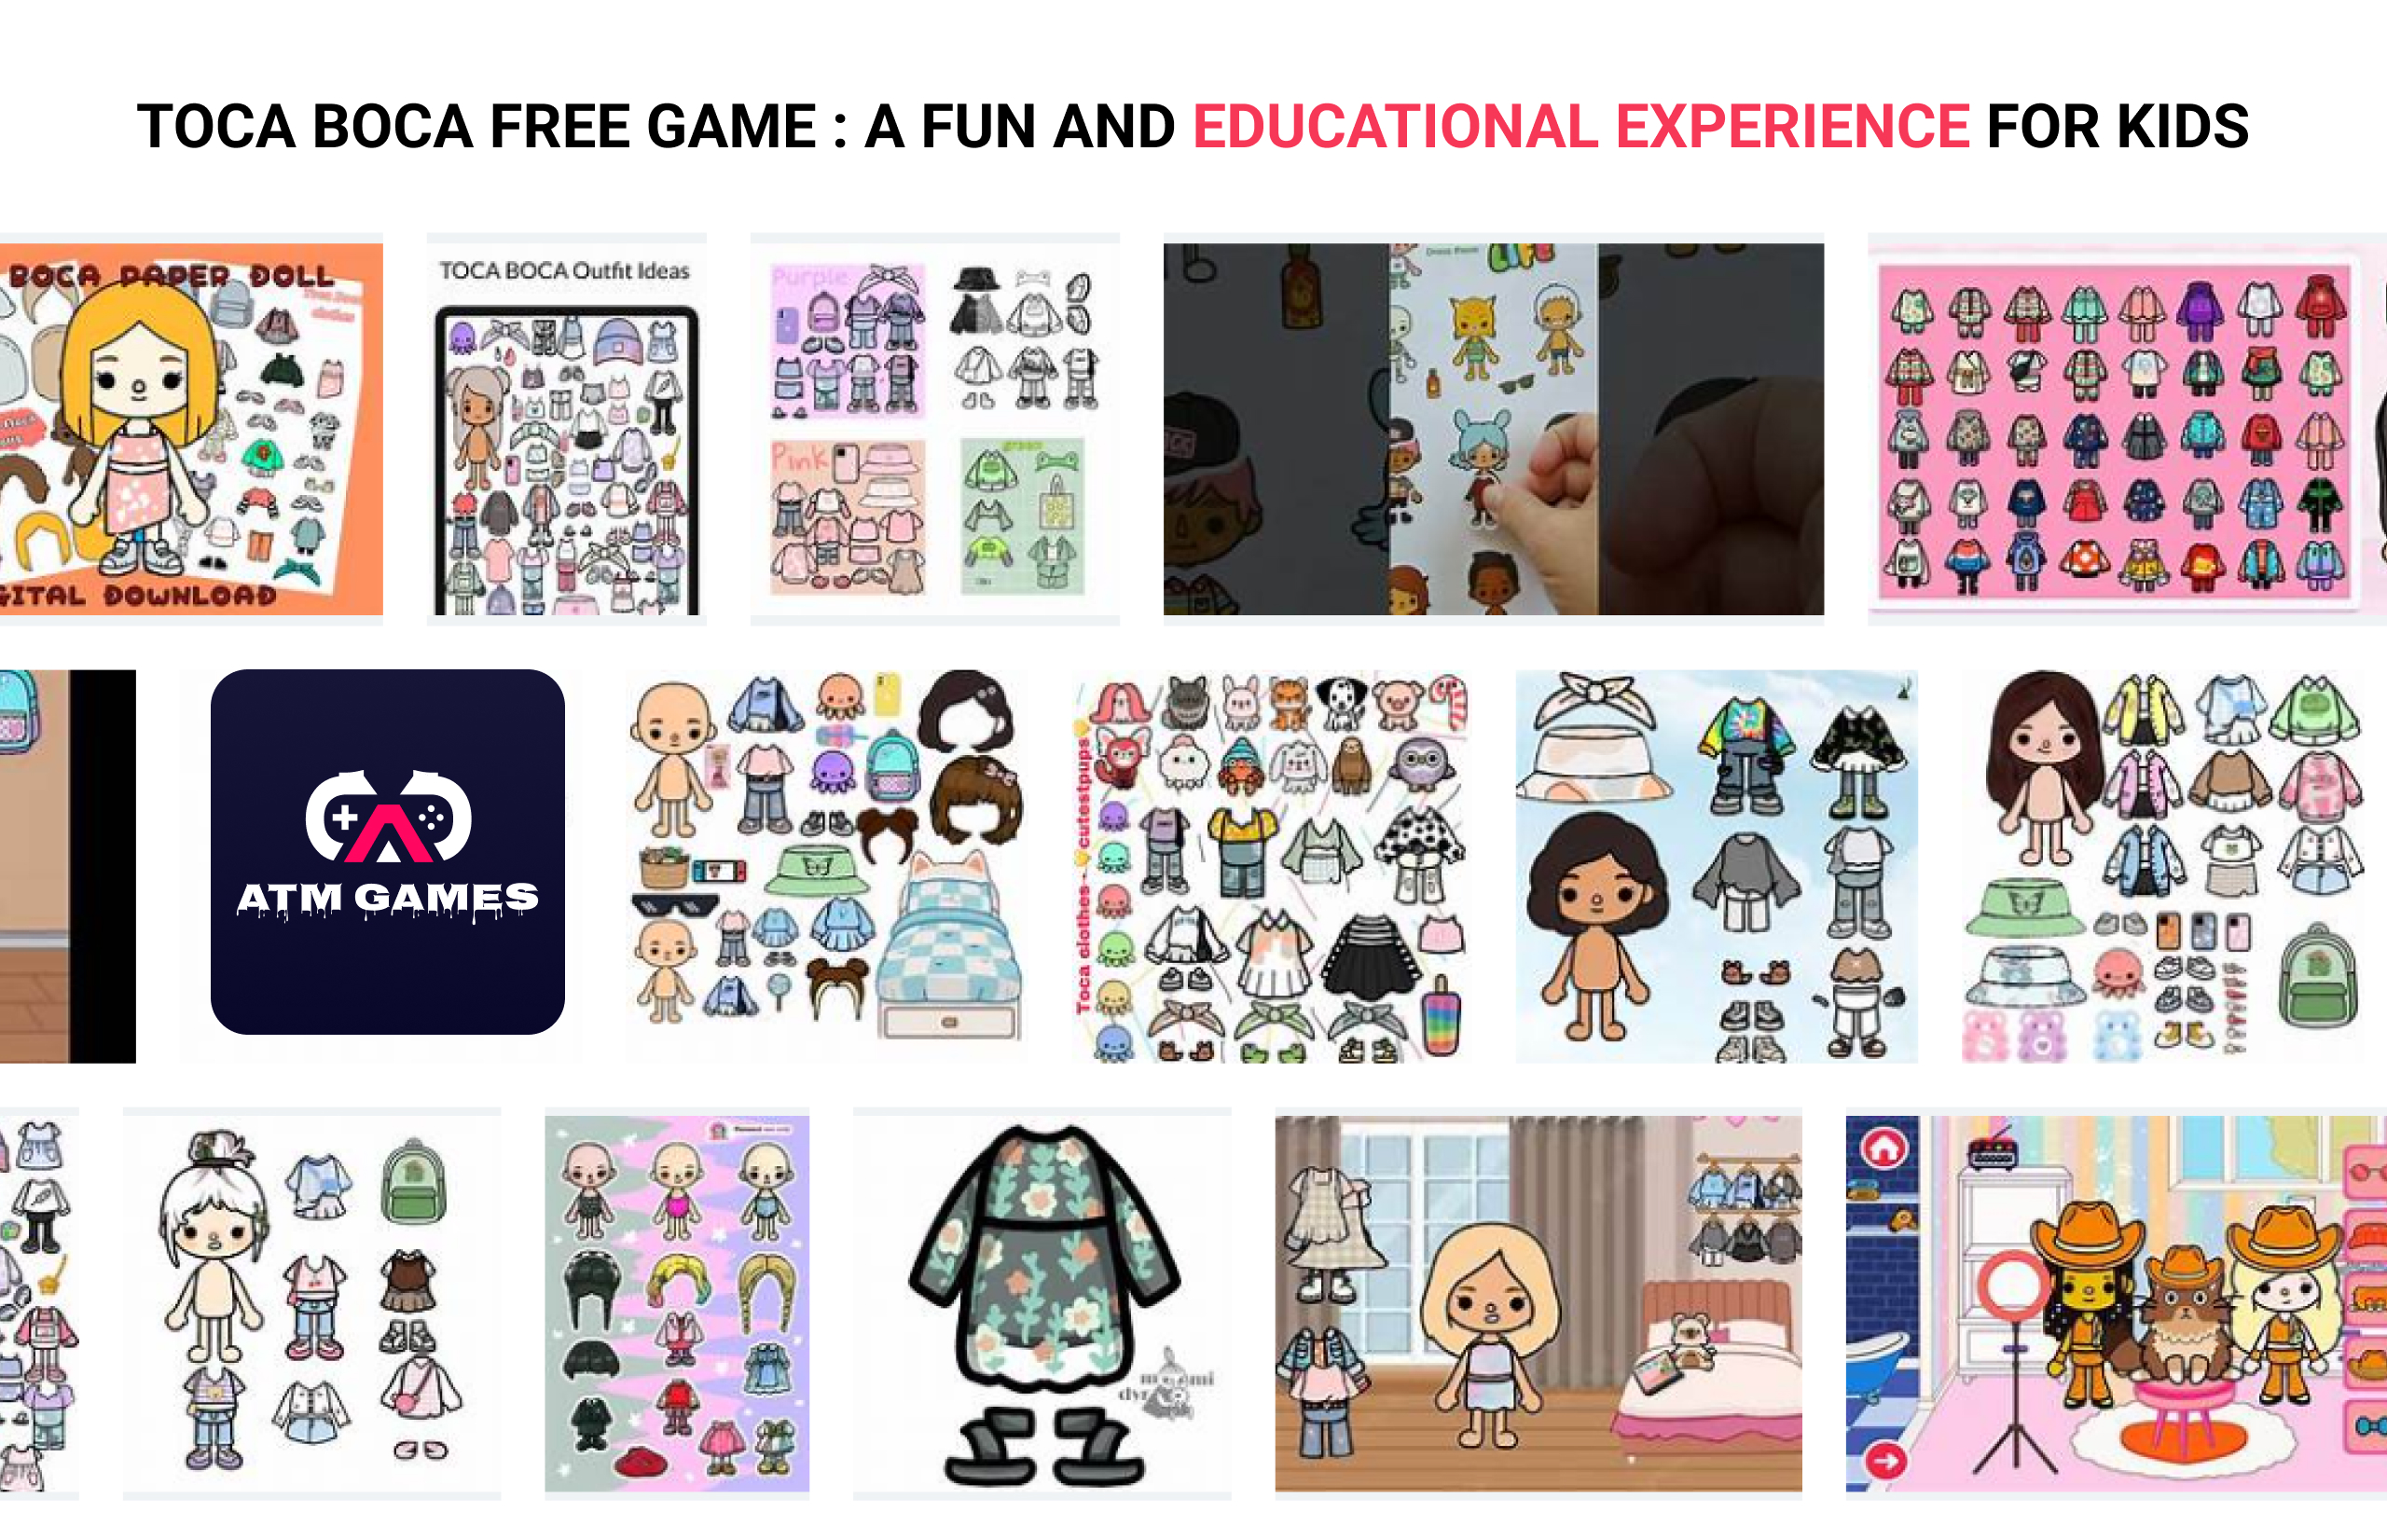 Toca Boca Free Game: A Fun and Educational Experience for Kids